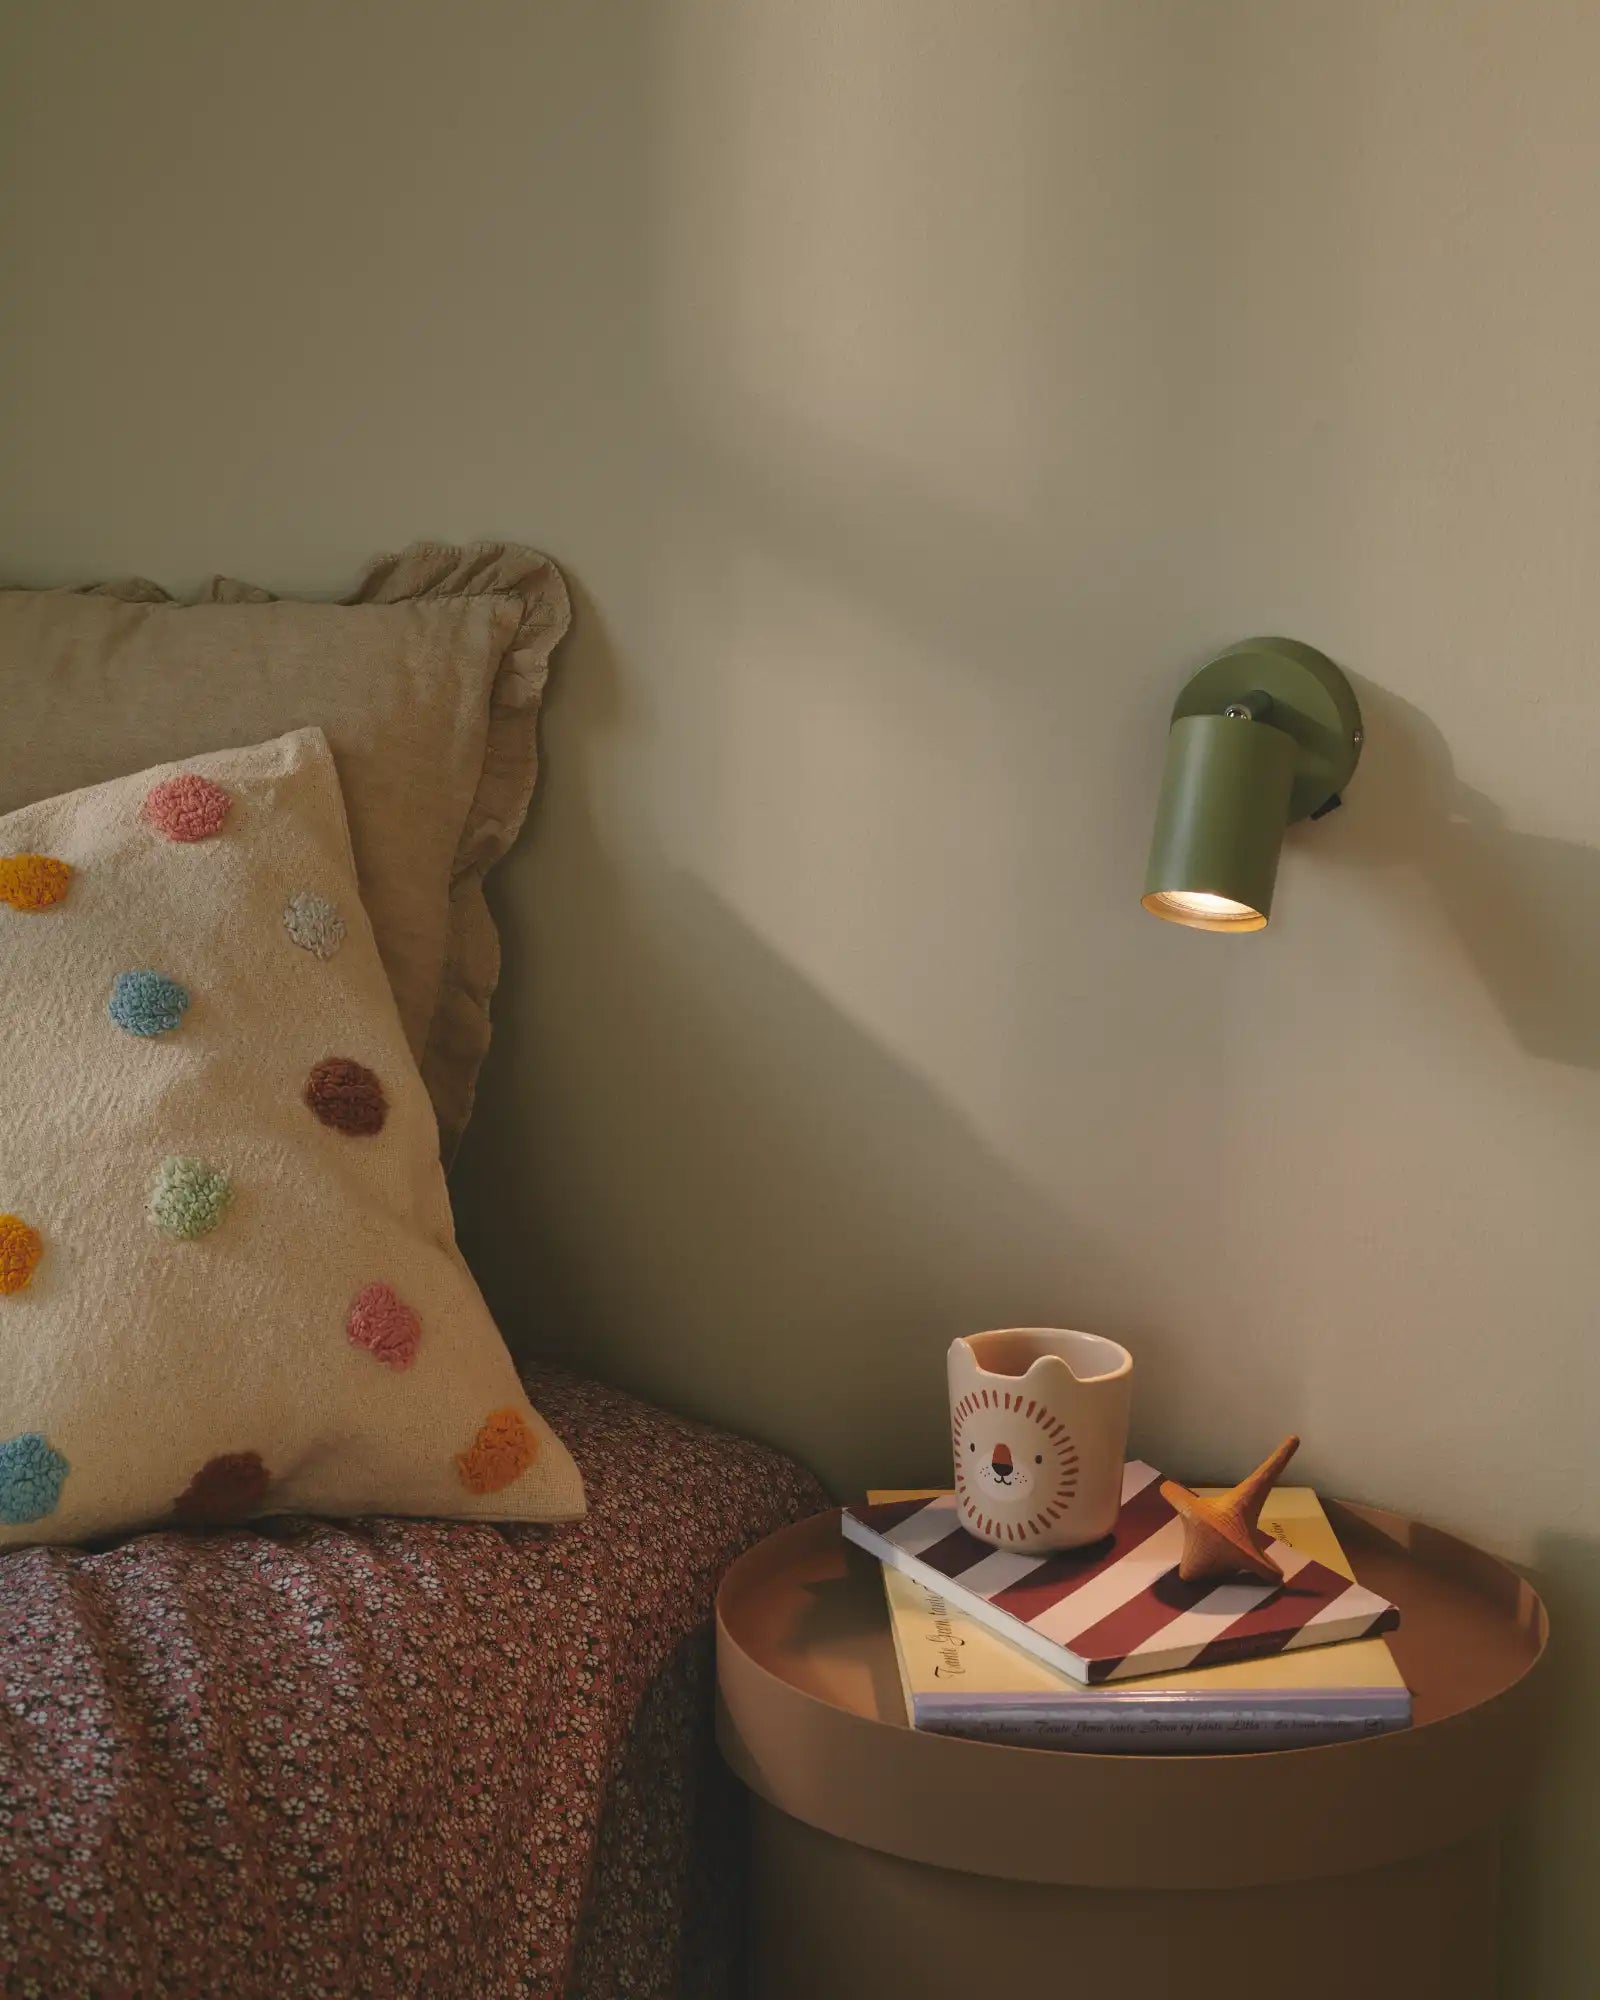 Explore Wall Light by Nordlux Lighting featured within a contemporary nursery room | Nook Collections